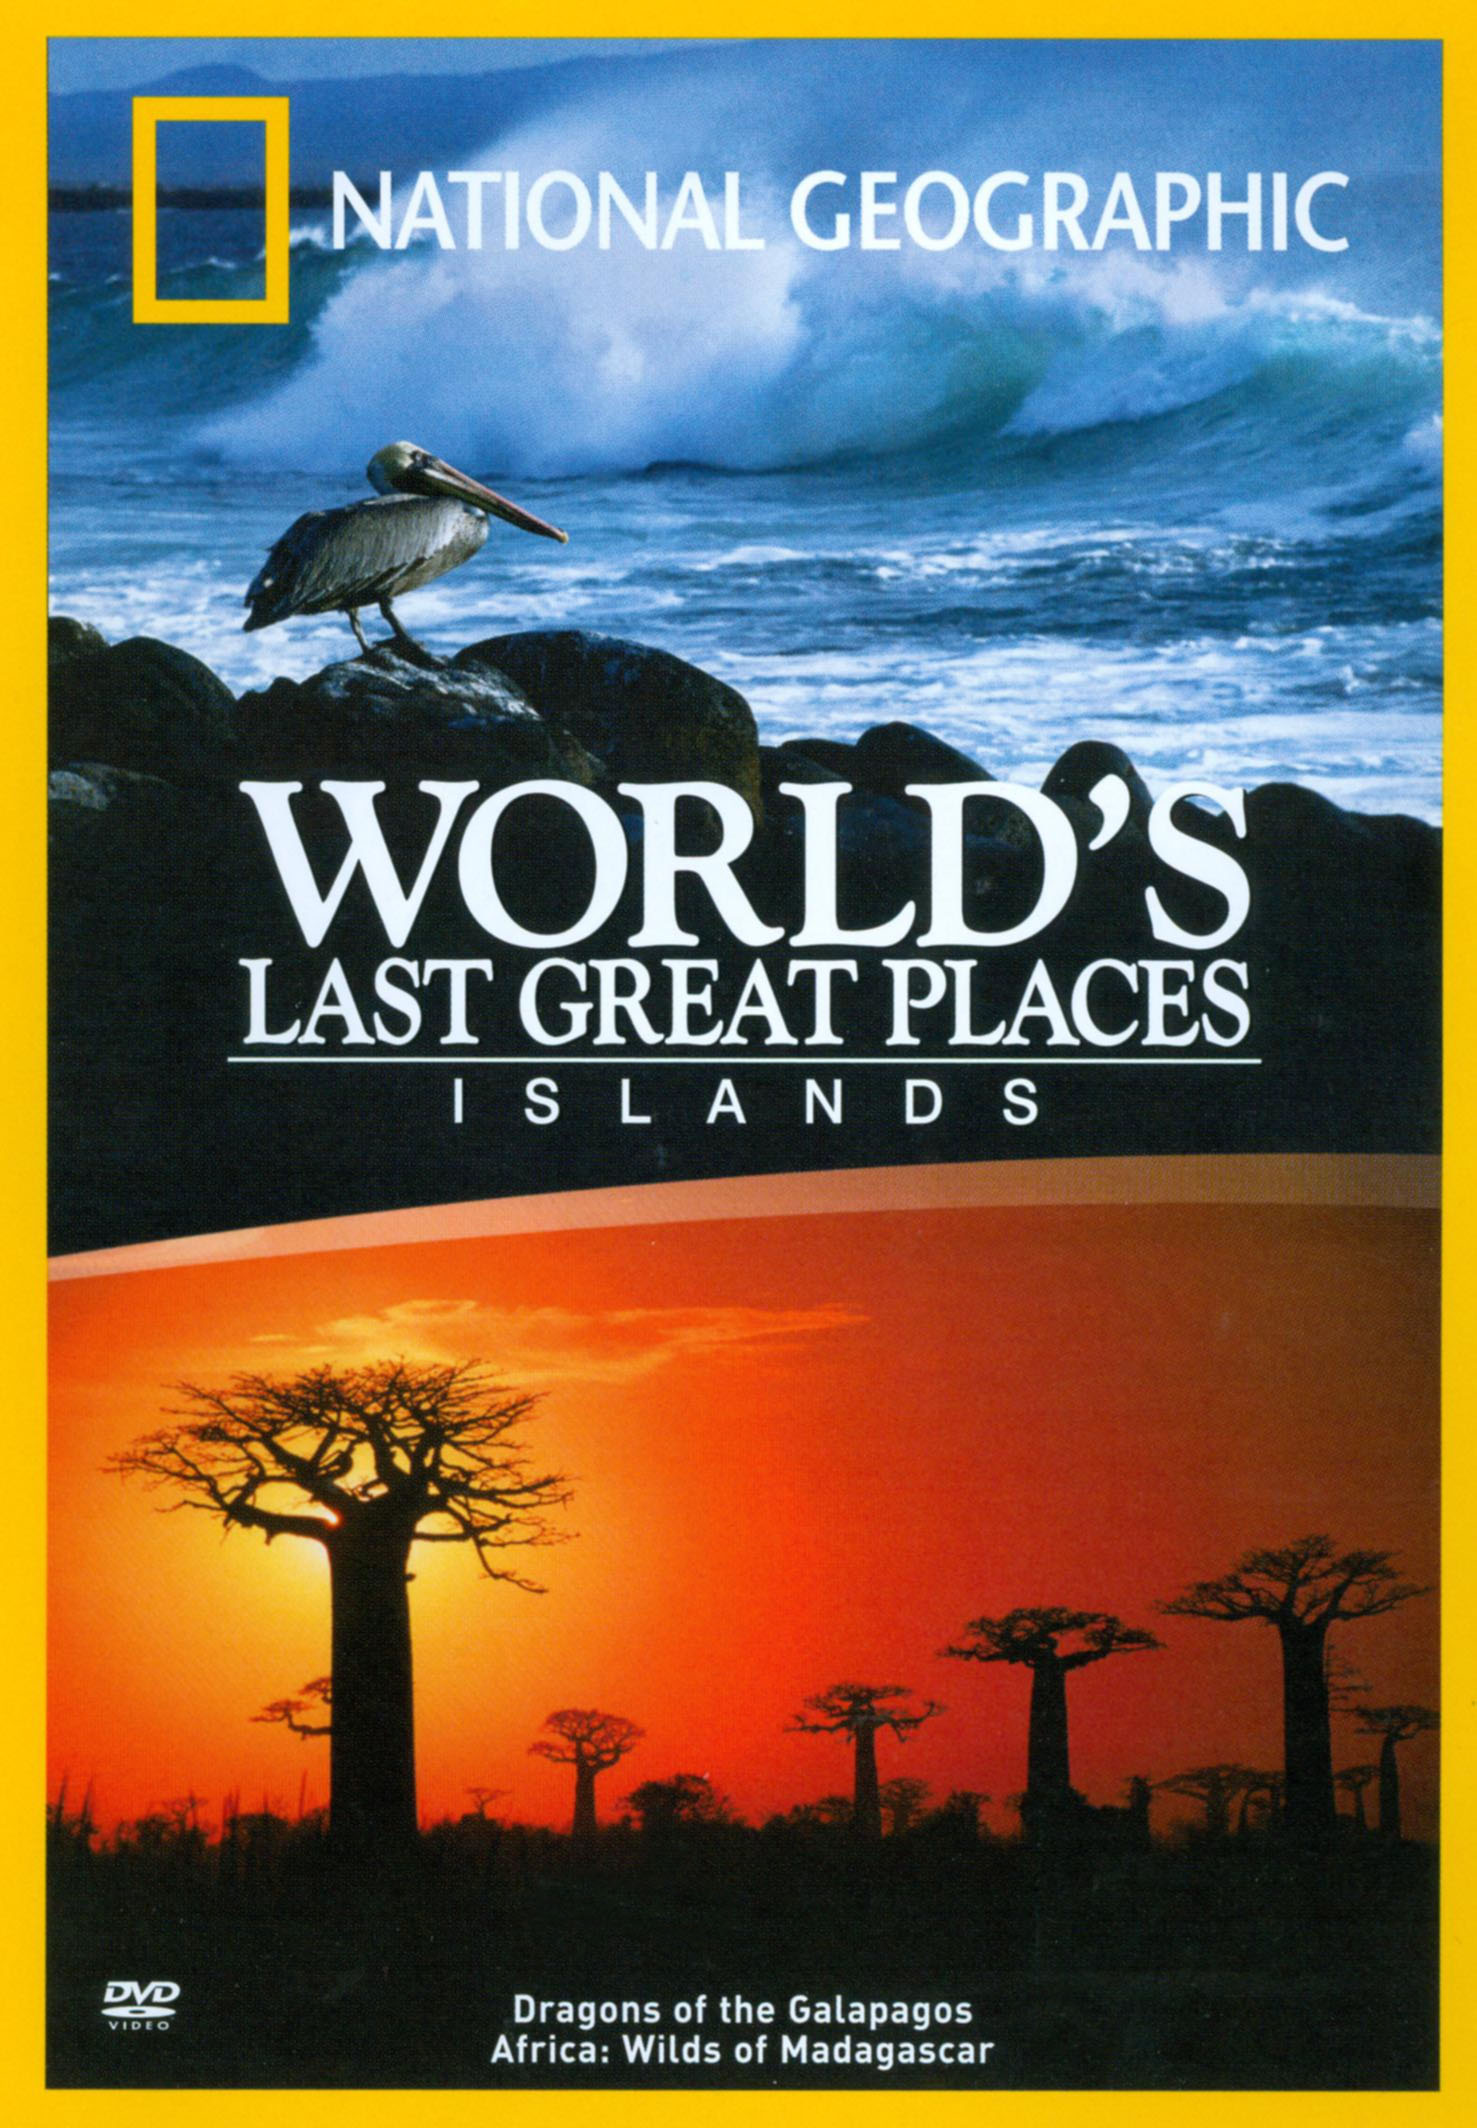 National Geographic: World's Last Great Places - Islands - | Releases